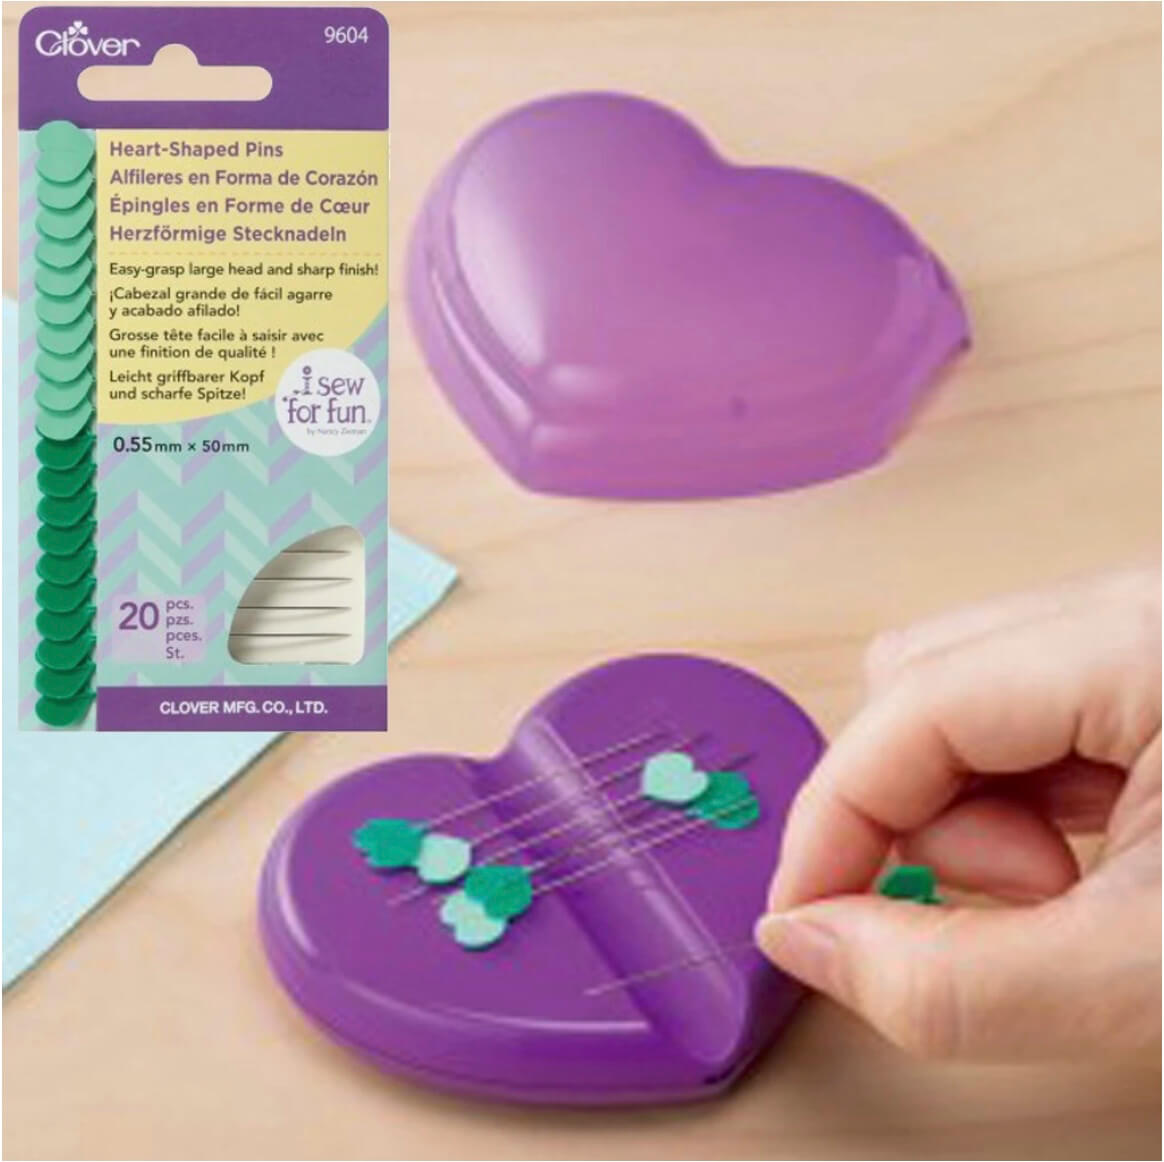 Clover's Heart Shaped Magnetic Pin Caddy and Heart Shaped Pins Available at Nancy Zieman Productions at ShopNZP.com